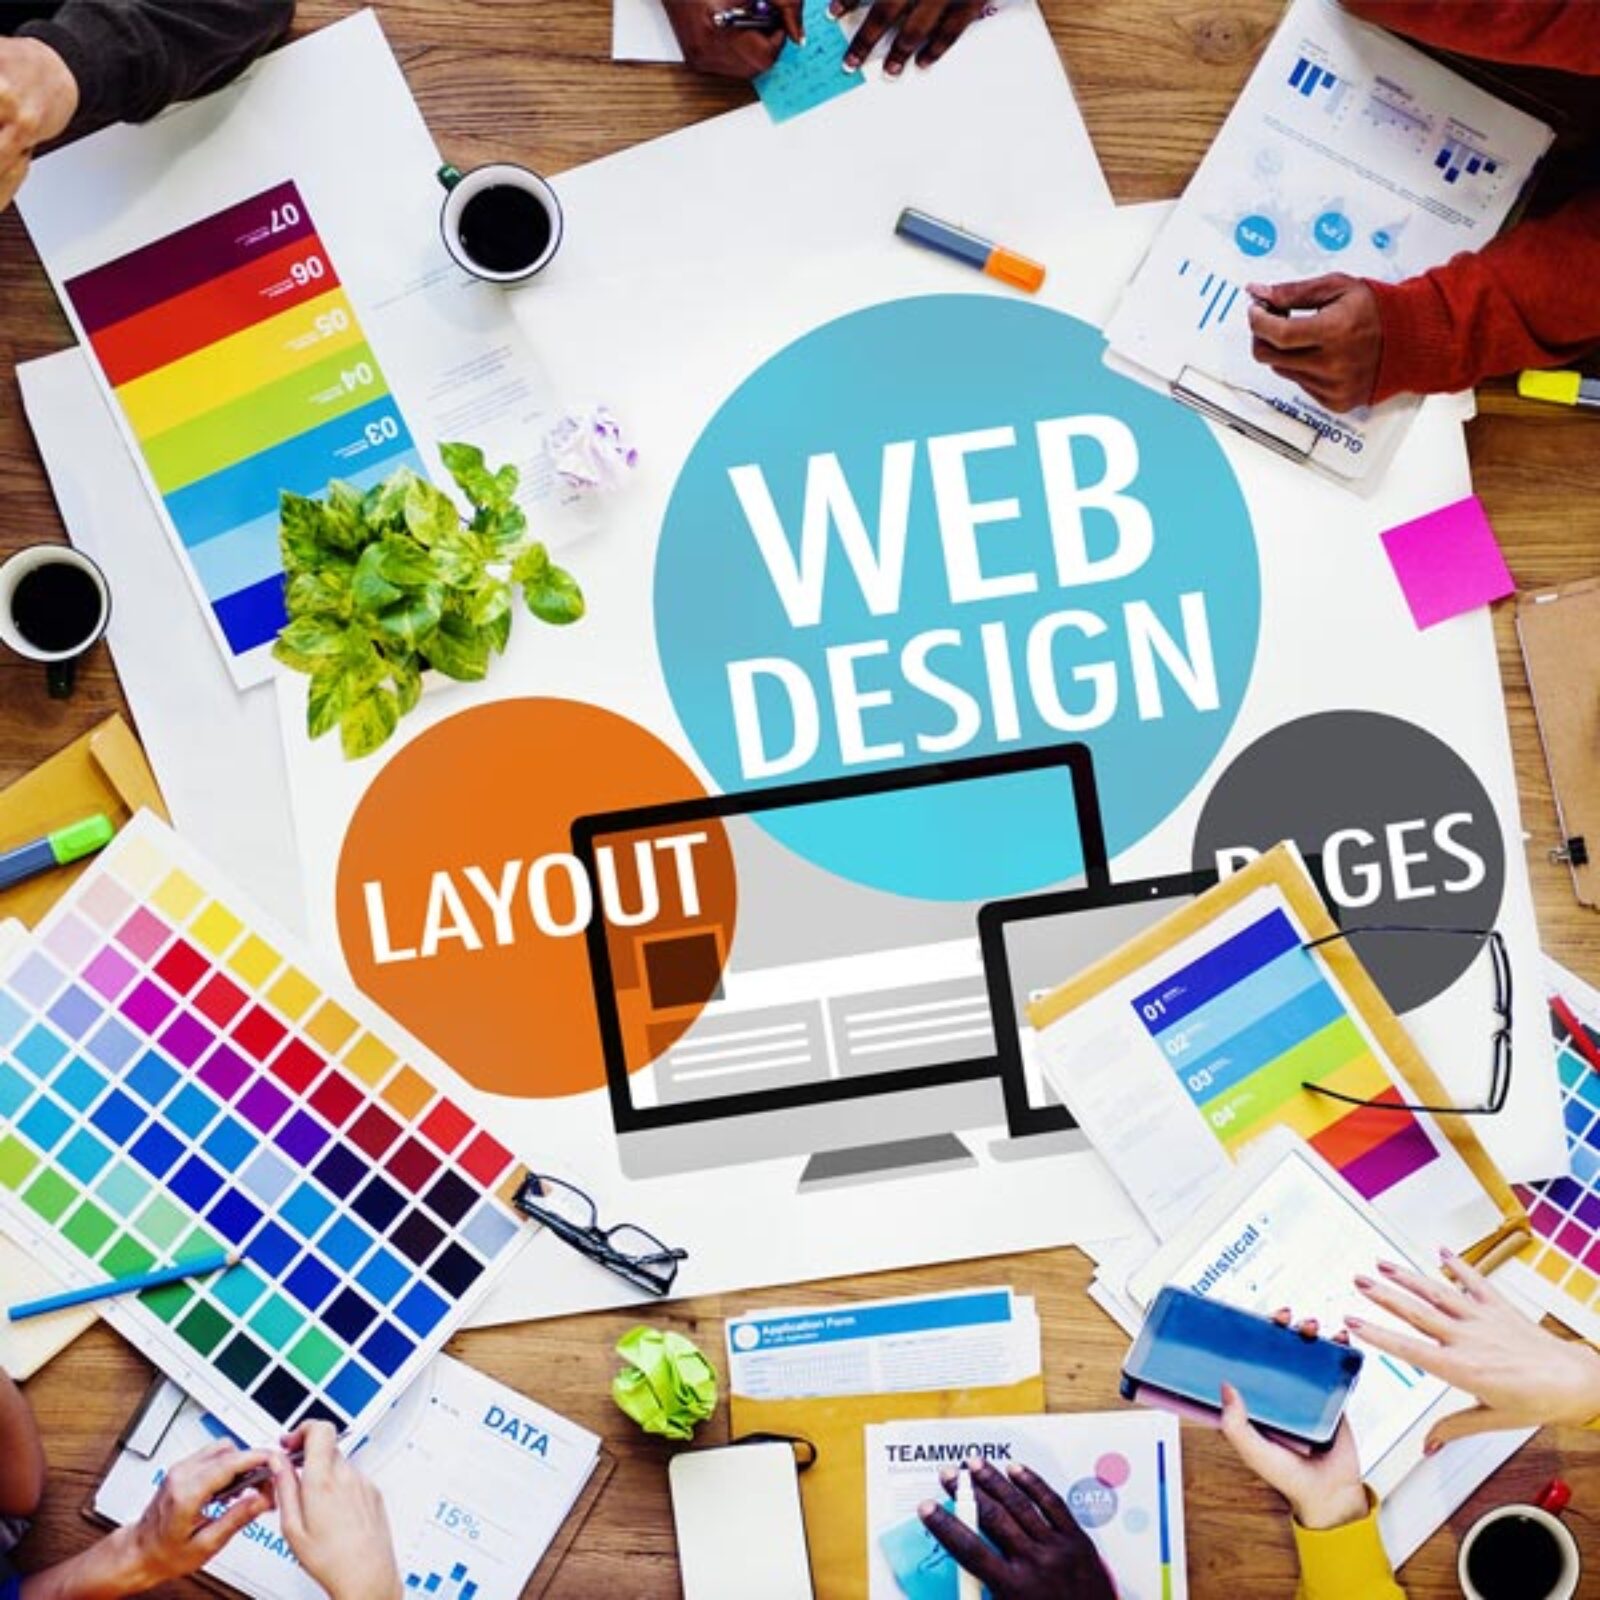 There are a few things you should keep in mind when choosing a web design company to work with